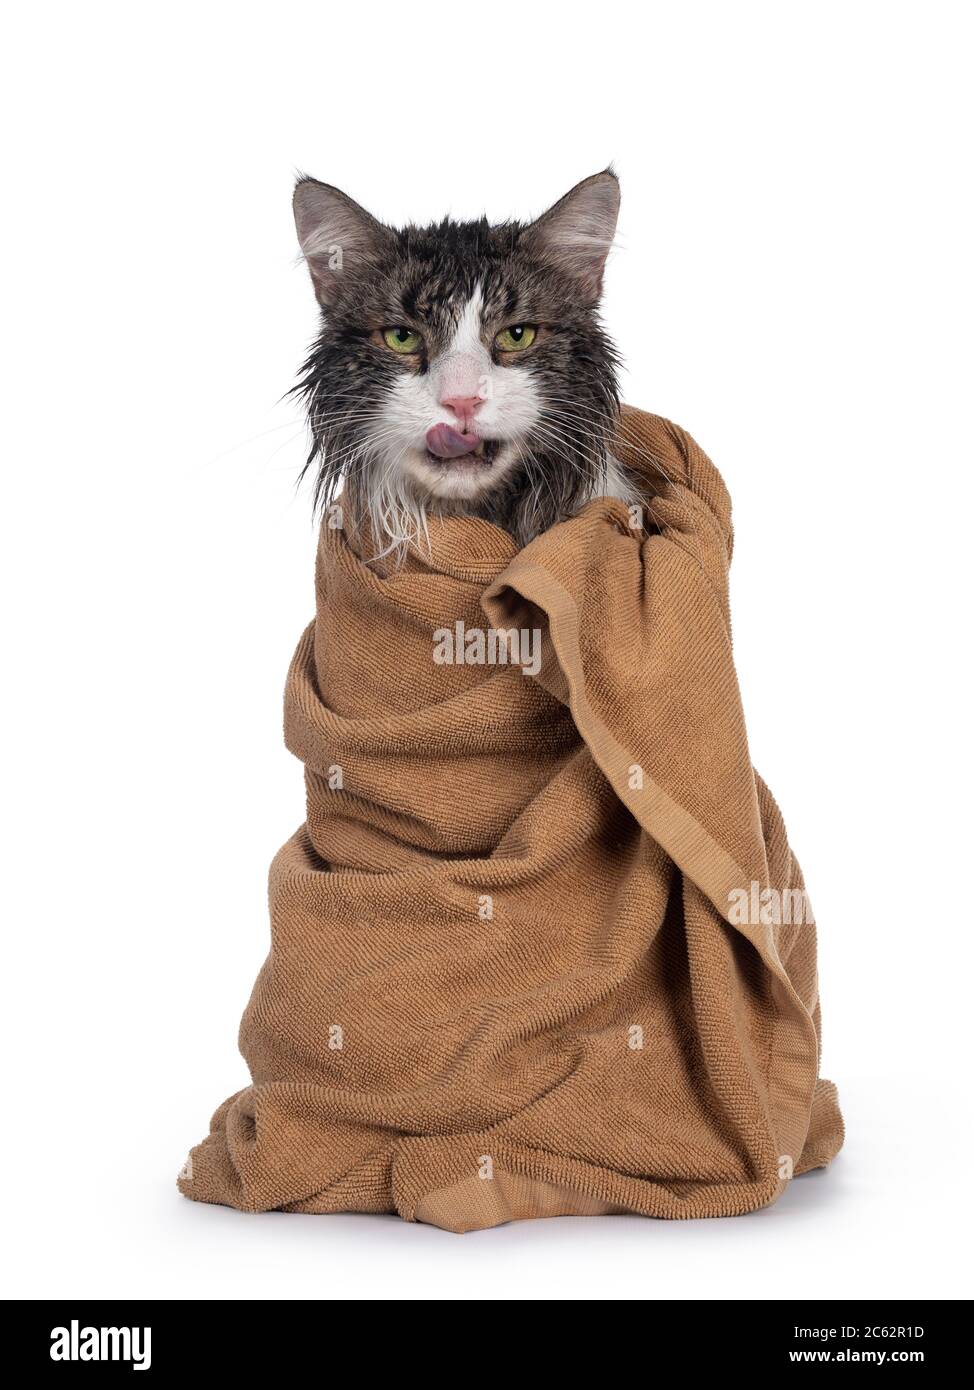 Wet freshly washed adult Norwegian Forestcat, sitting facing front wrapped up in brown towel sticking out tongue. Looking annoyed to camera. Isolated Stock Photo